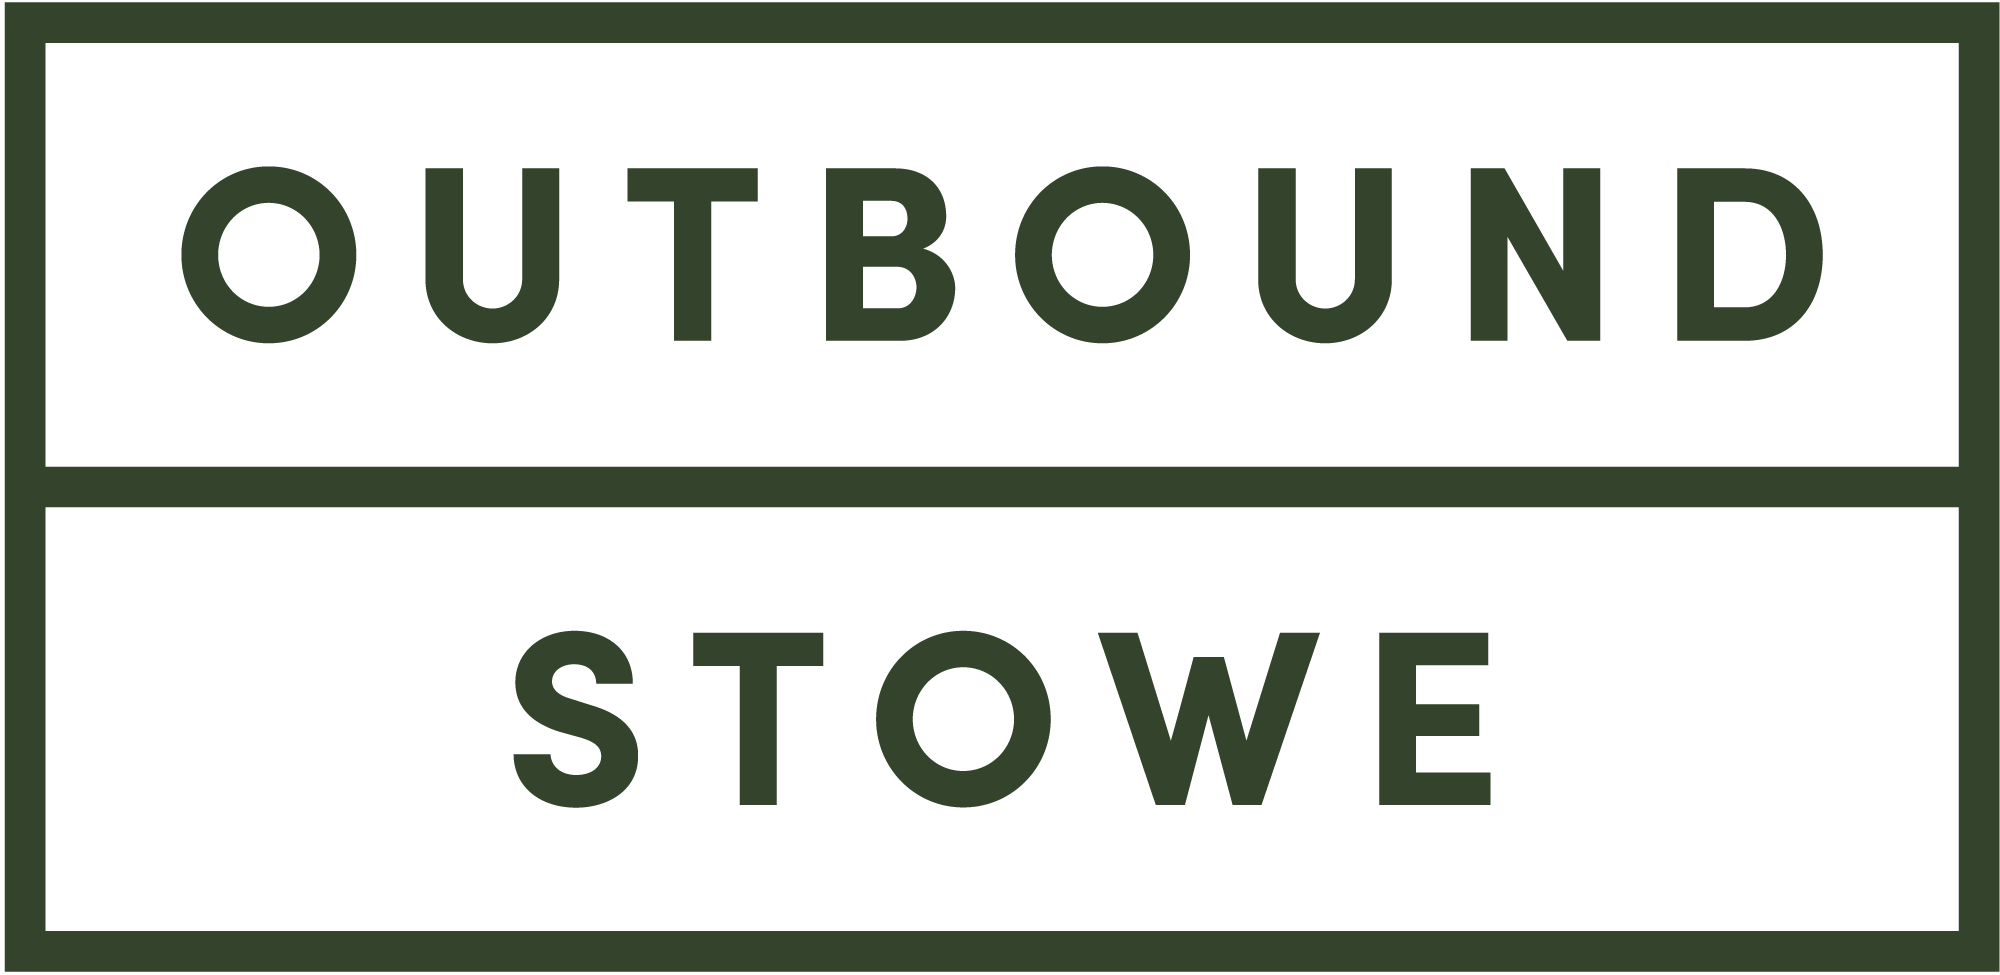 Green ink displays "Outbound Stowe" on a blank surface for a distinct presentation.